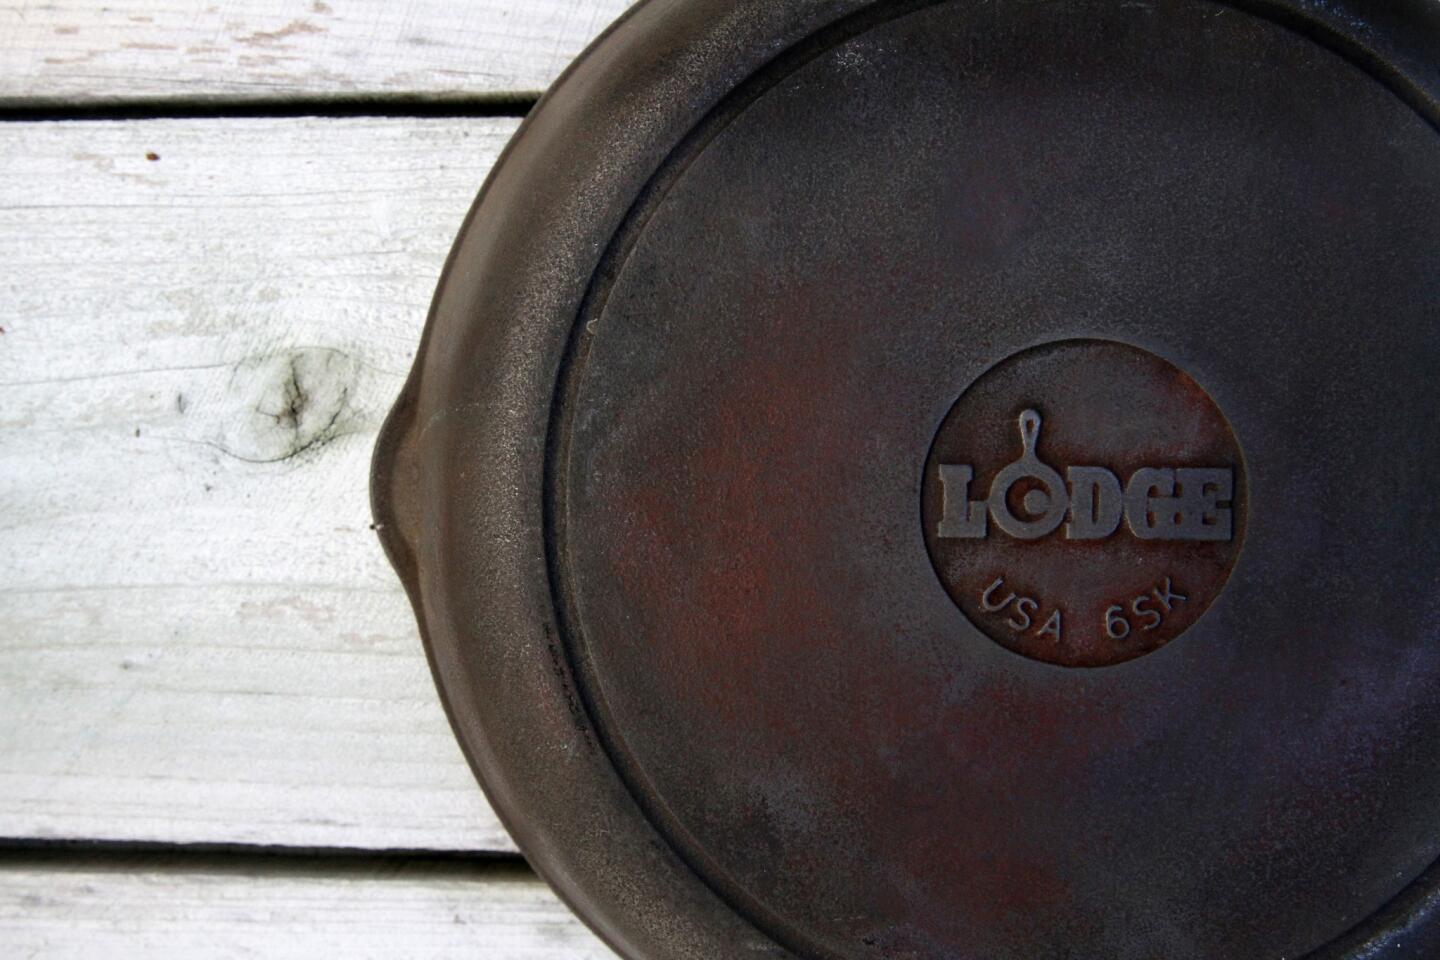 Lodge Cast Iron Nation: Great American by The Lodge Company